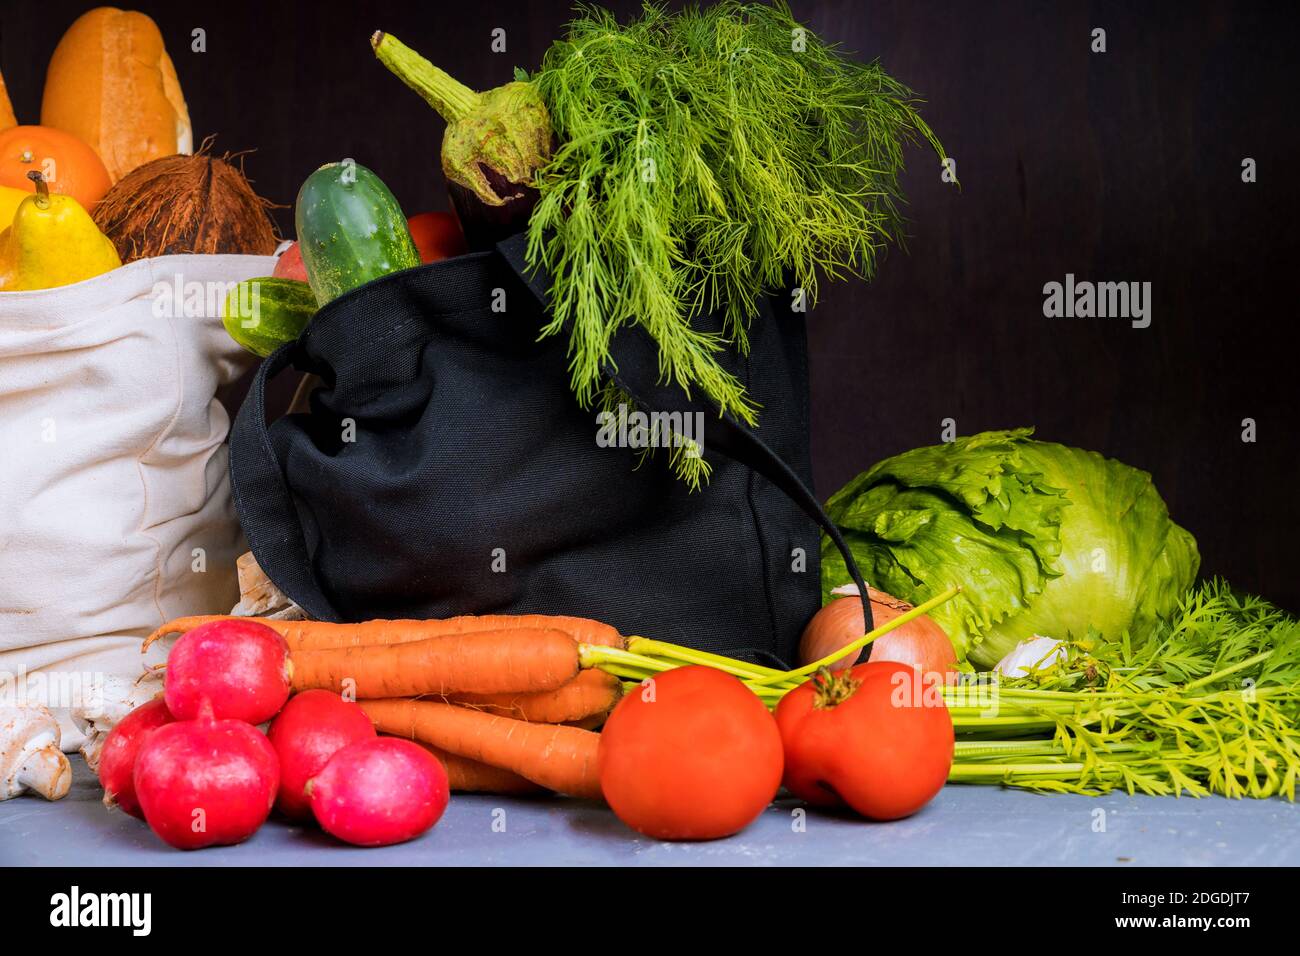 Shopping, groceries, bags full of vegetables and fruits. Stock Photo